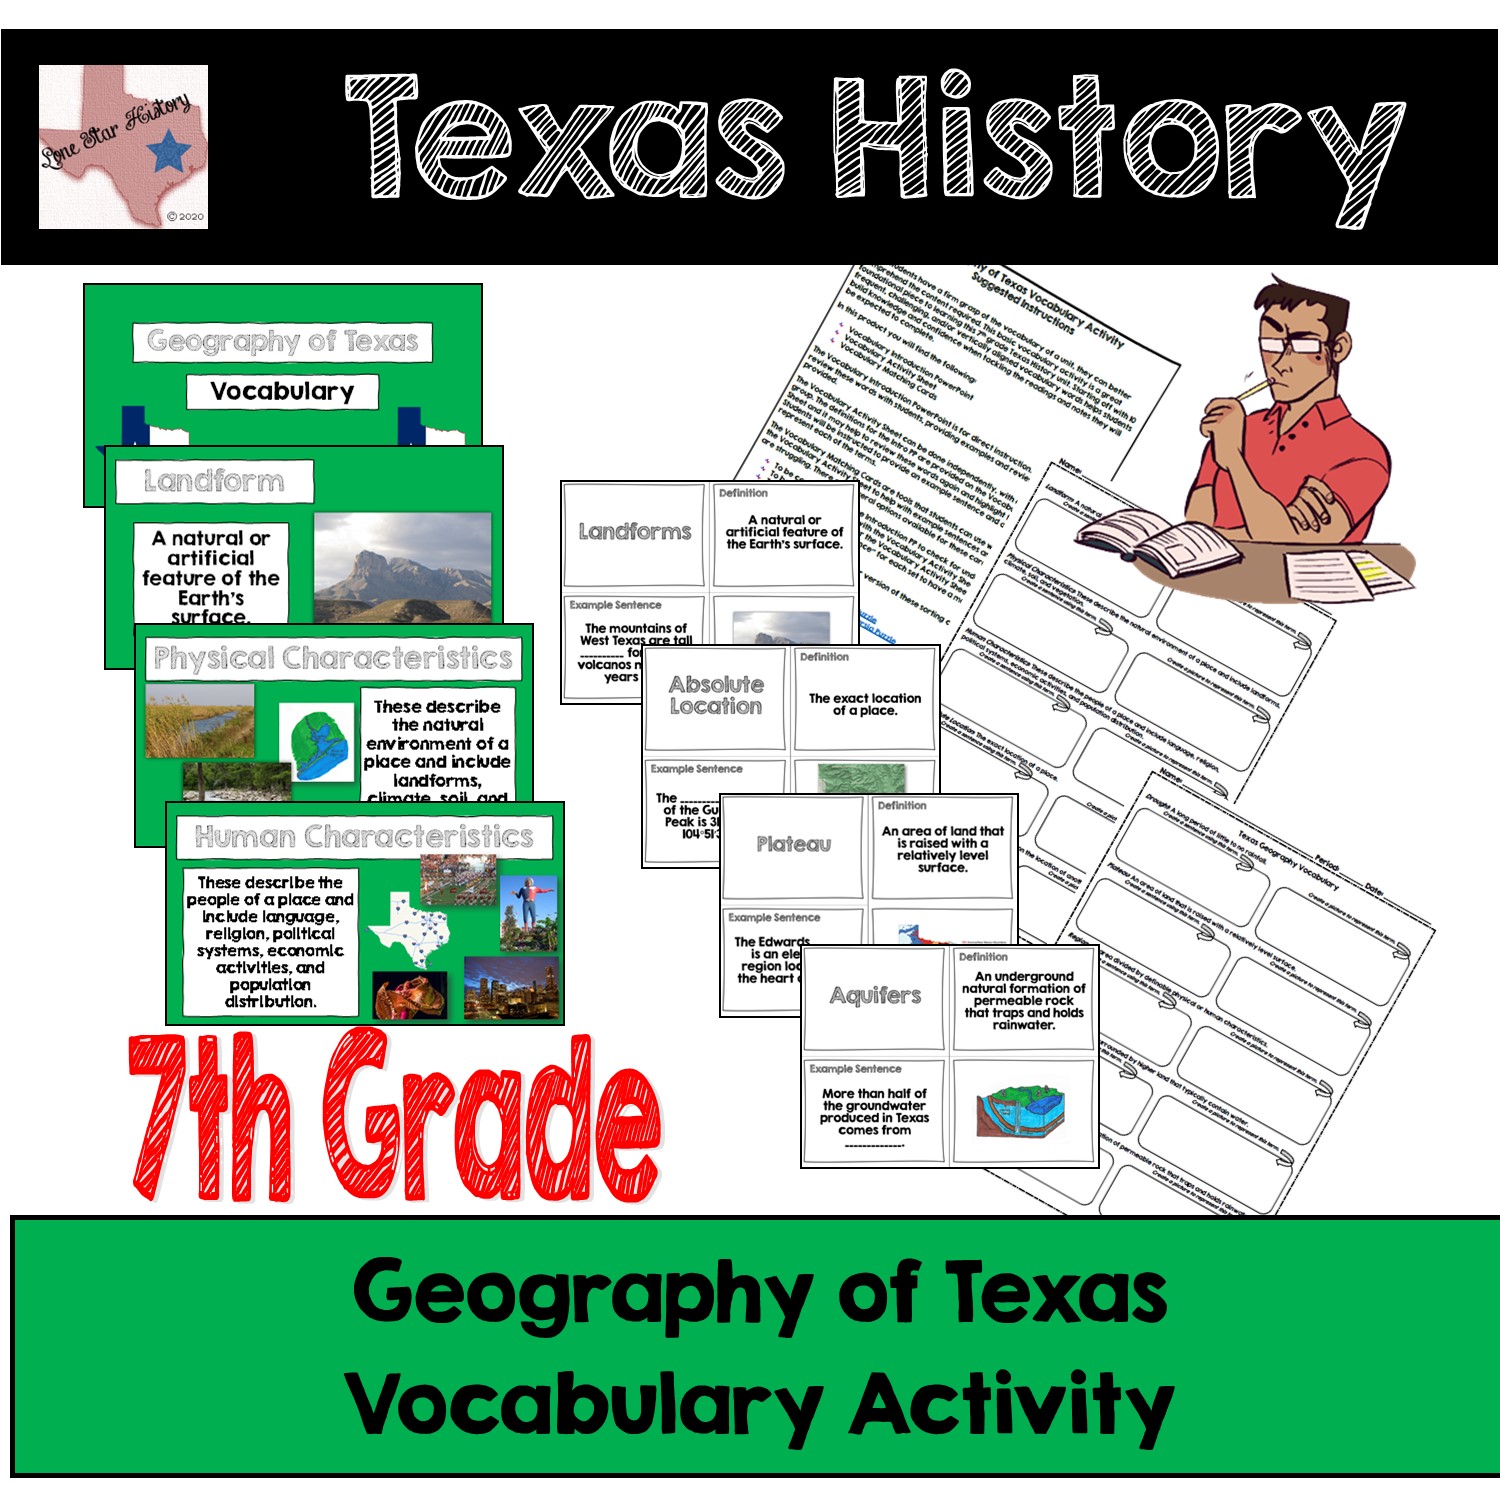 Texas History Great Depression & WWII Diamond Puzzle with digital version -  Classful